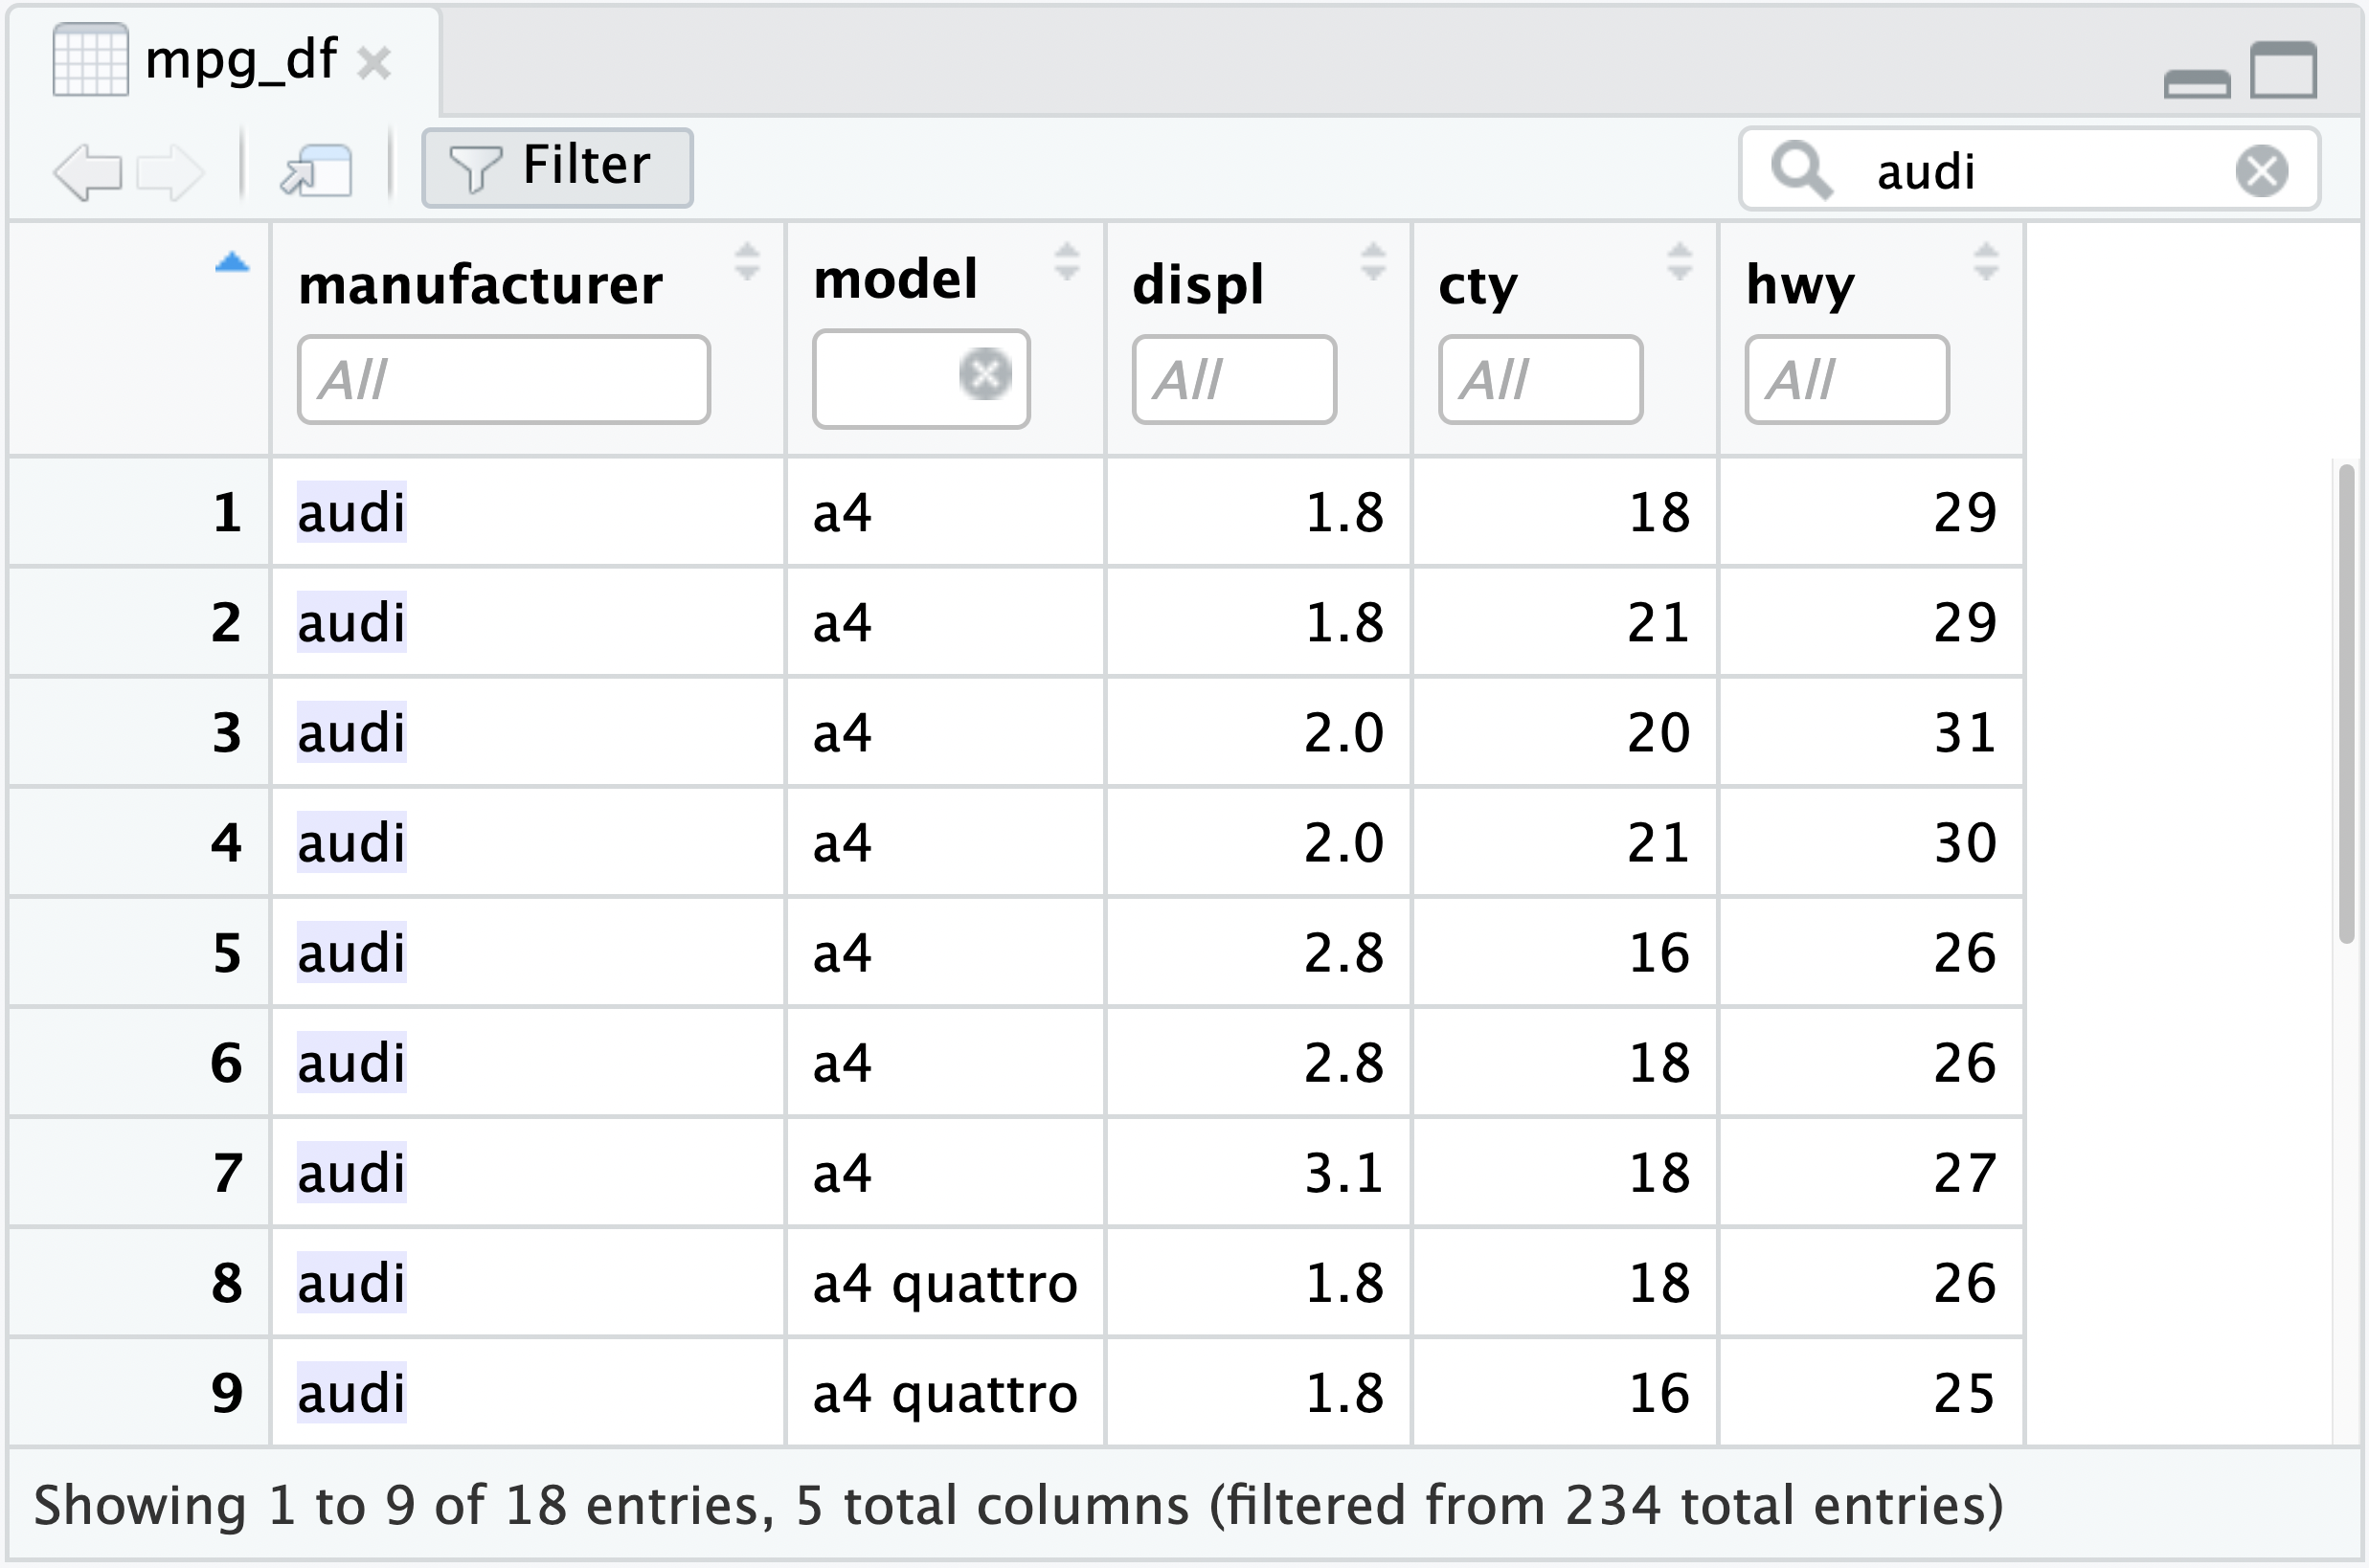 A datatable in the Data Viewer displaying 5 columns and 10 rows of the mpg_df dataset. The data is filtered down to rows that contain 'audi'.